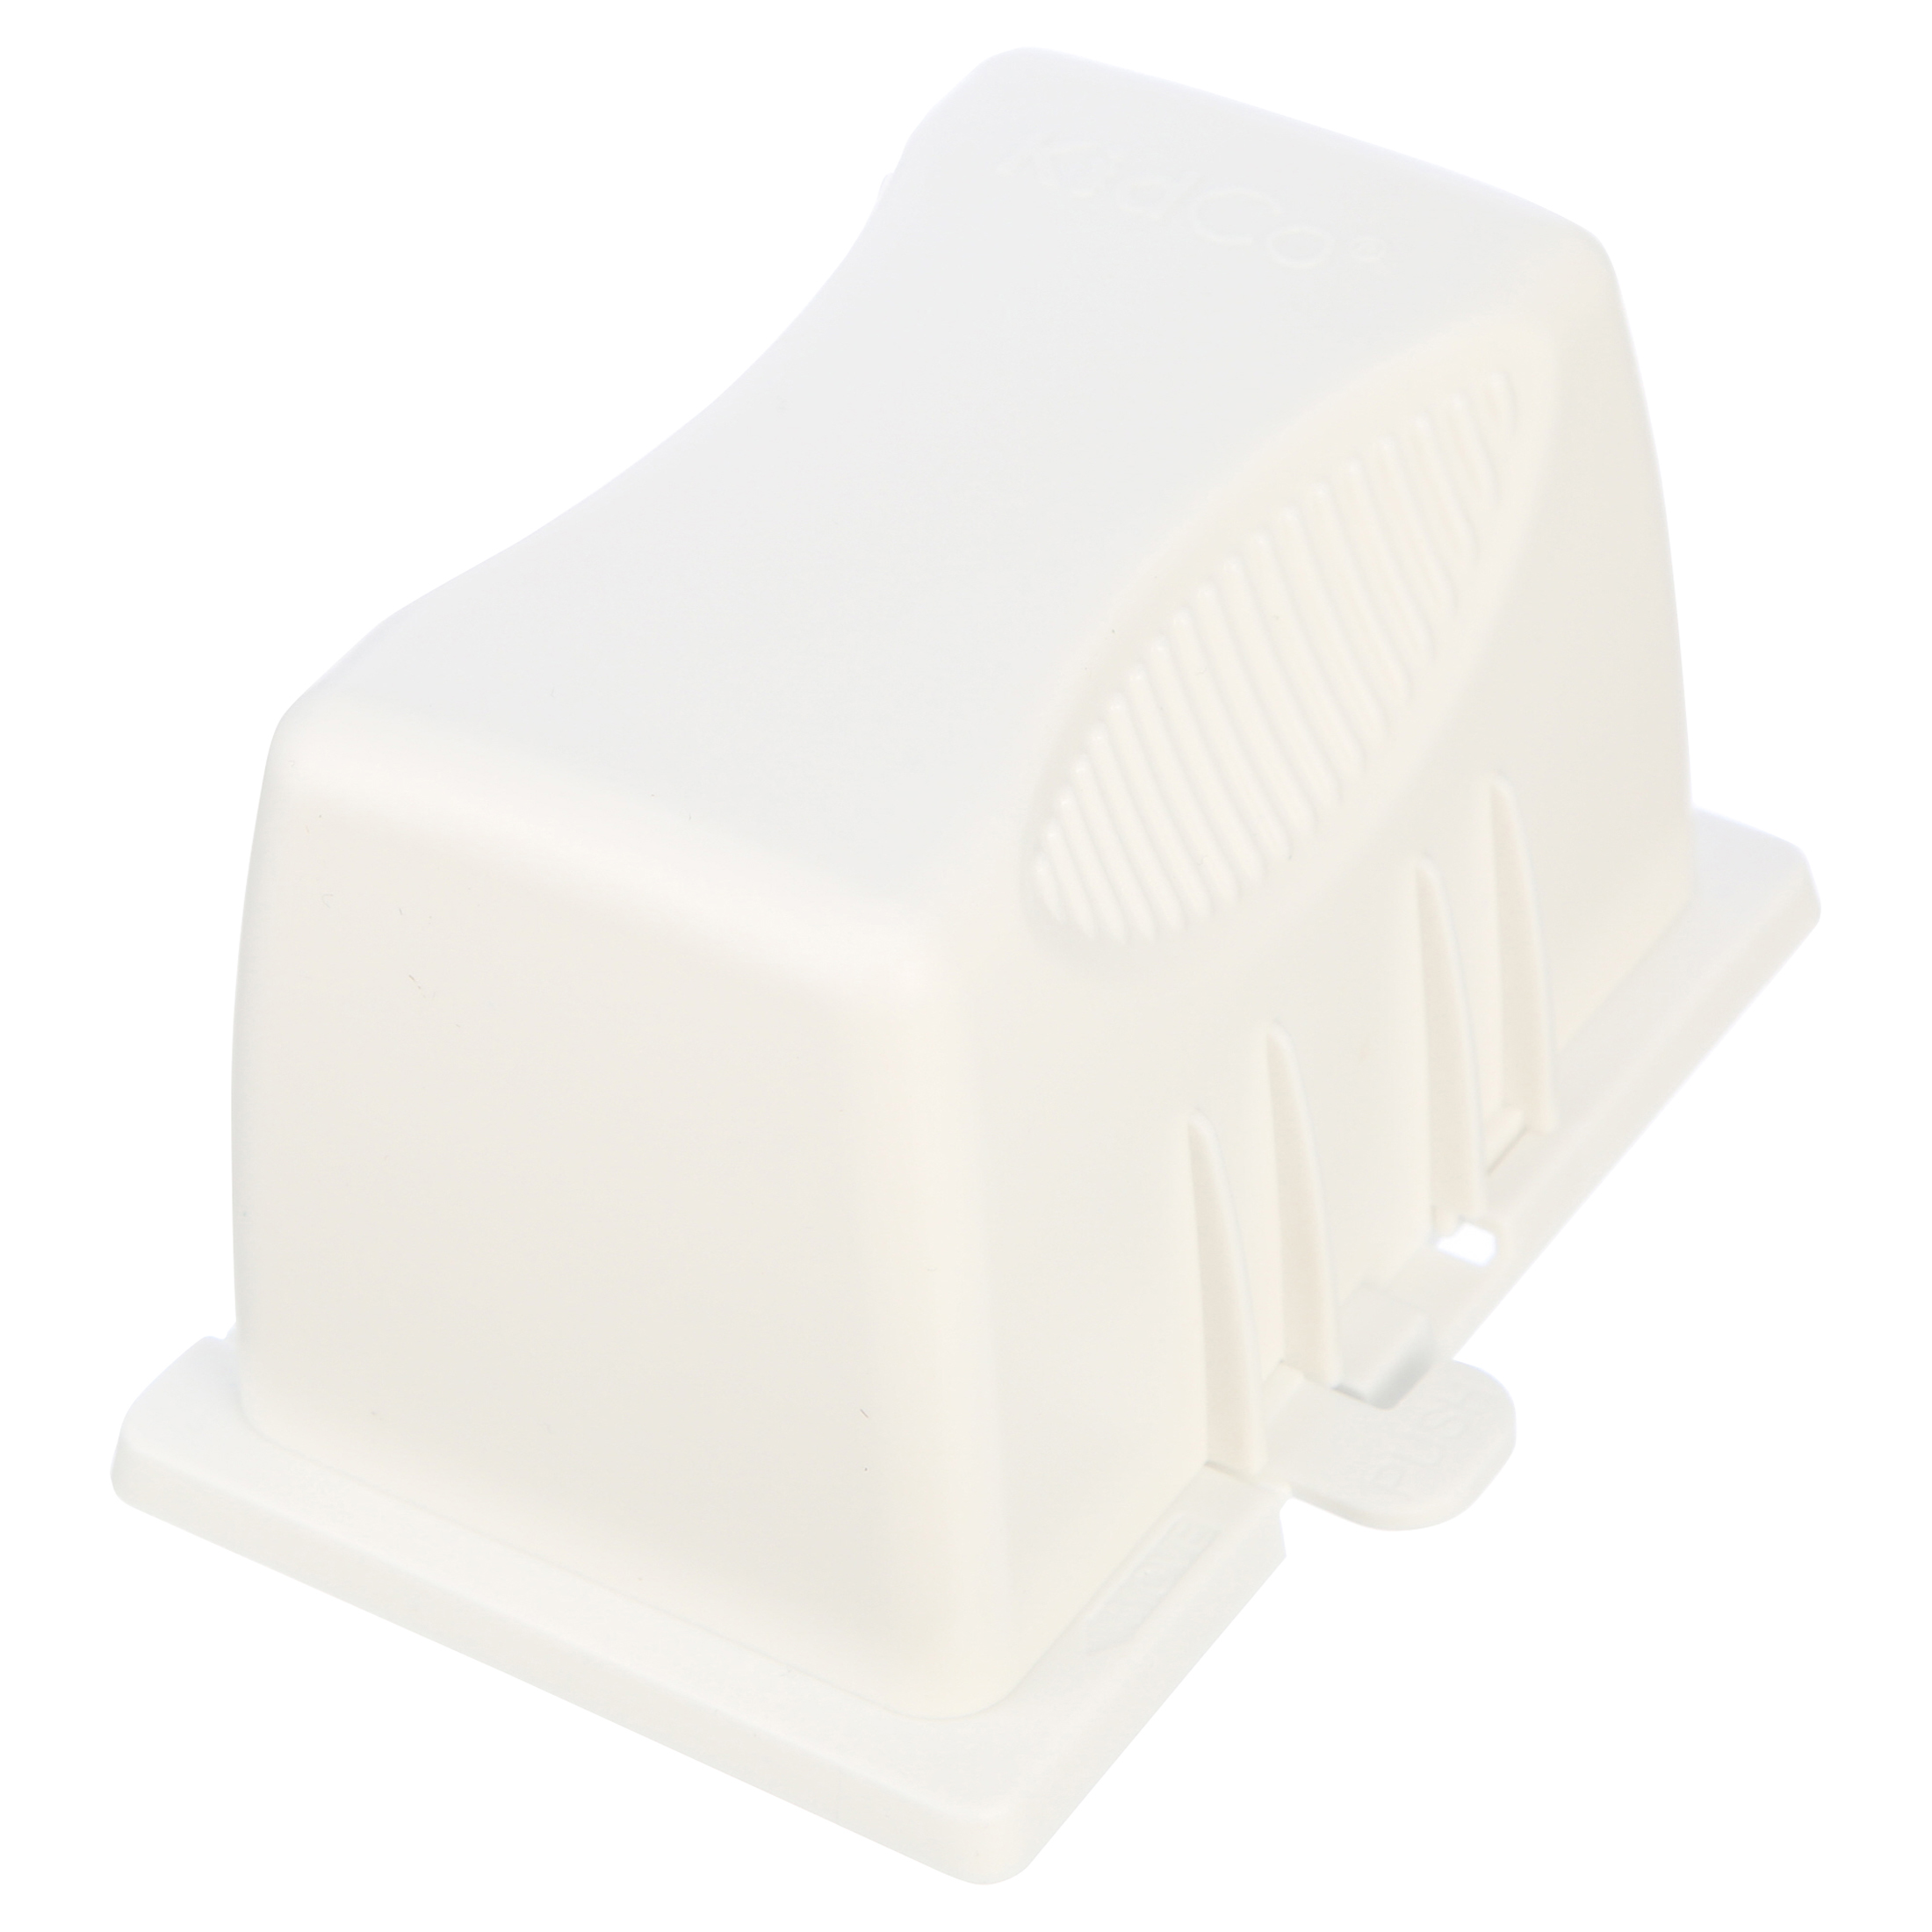 KidCo Child Safety Outlet Plug Cover, White, Plastic - image 5 of 7